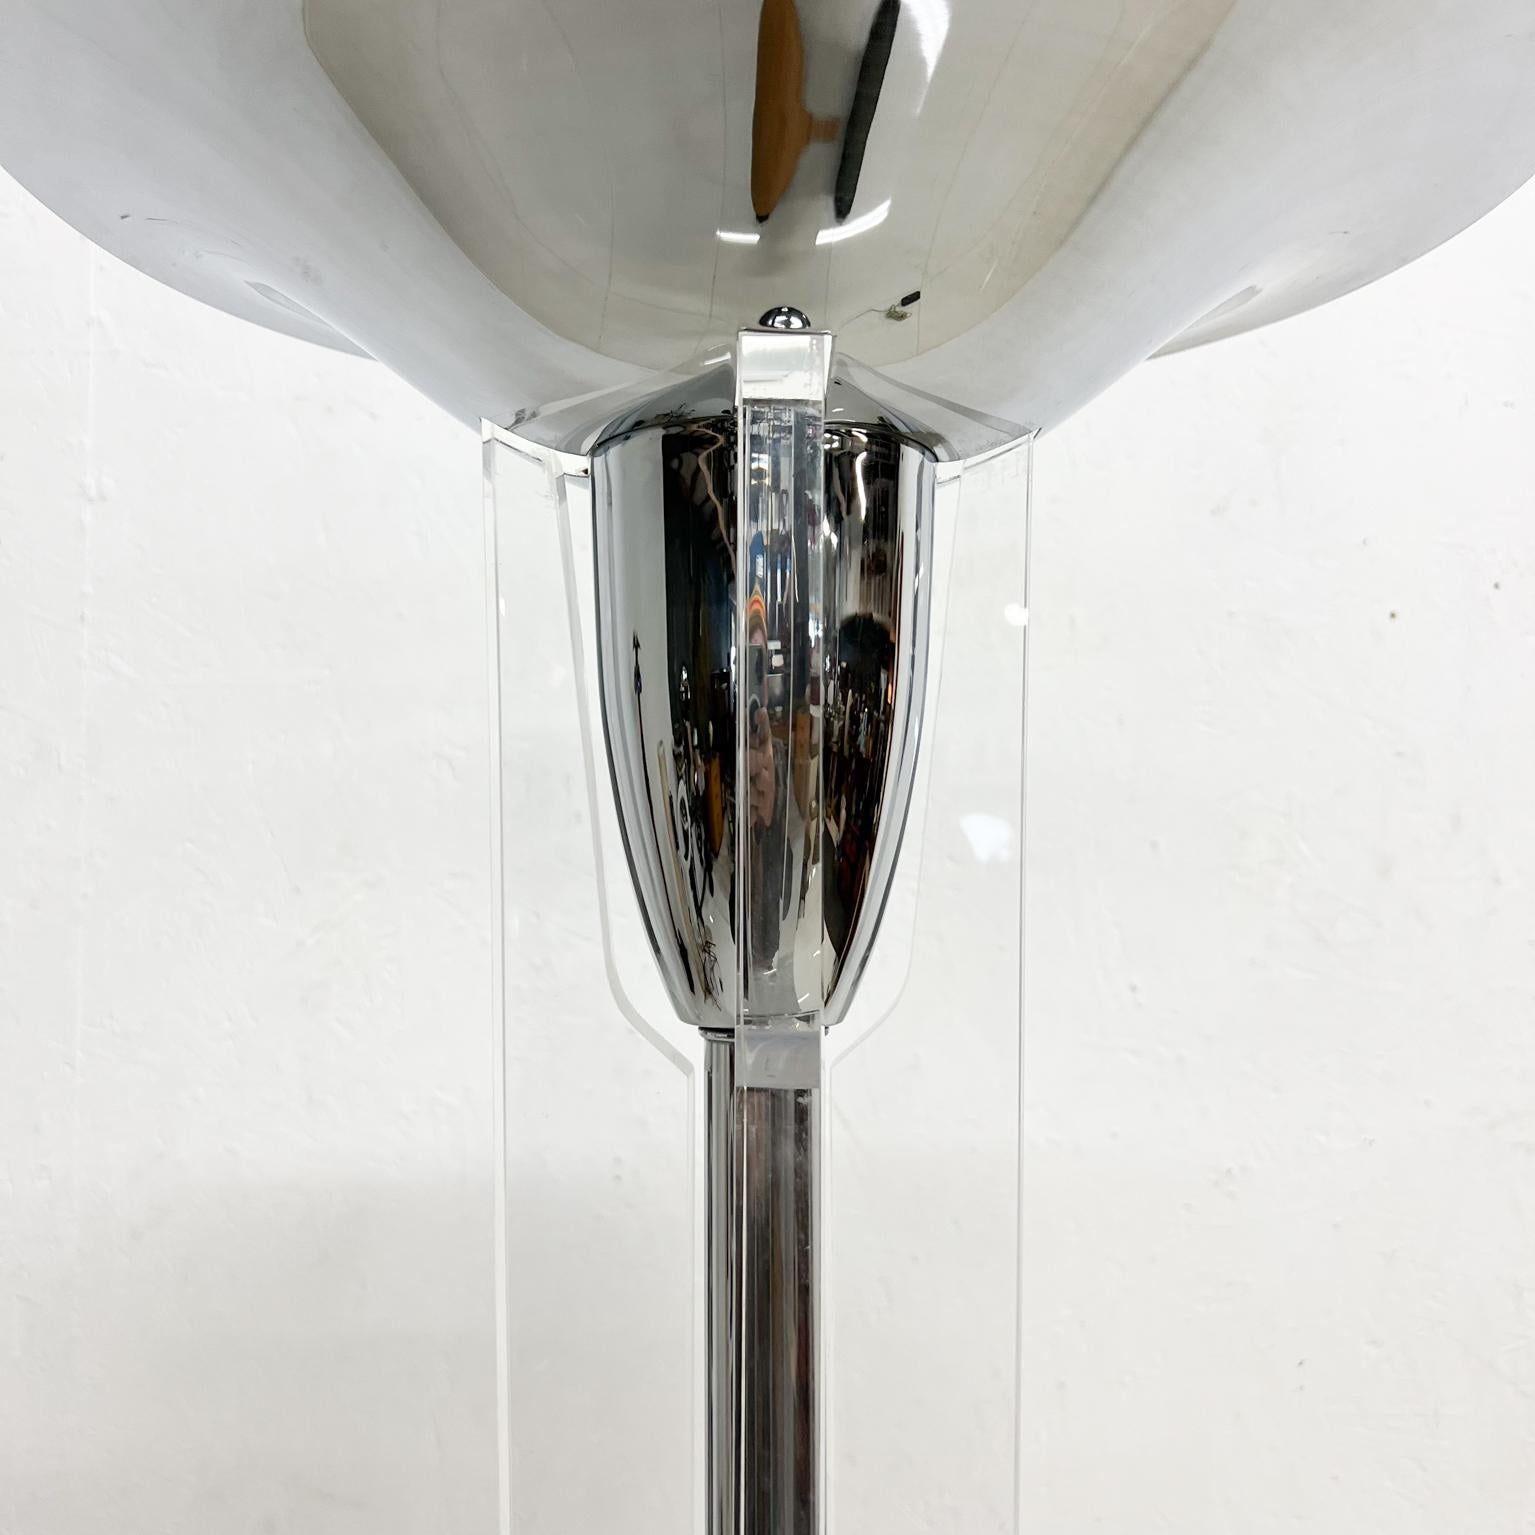 Art Deco Moderne Chrome Torchiere Floor Lamp by Boyd Lighting Company For Sale 2